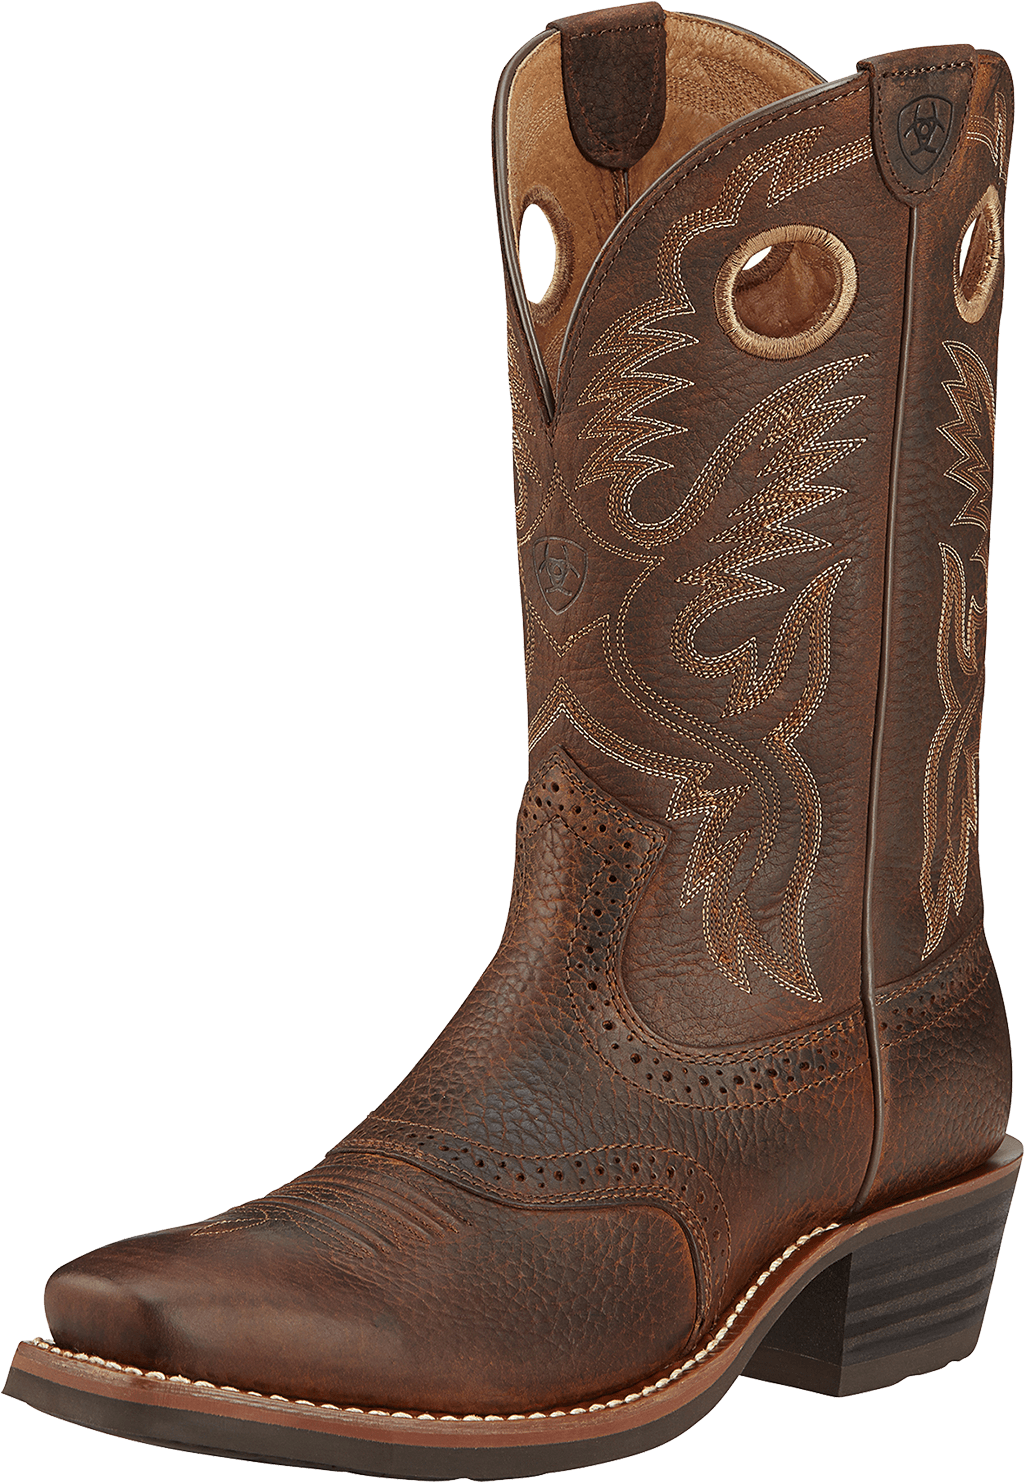 Boots PNG HD